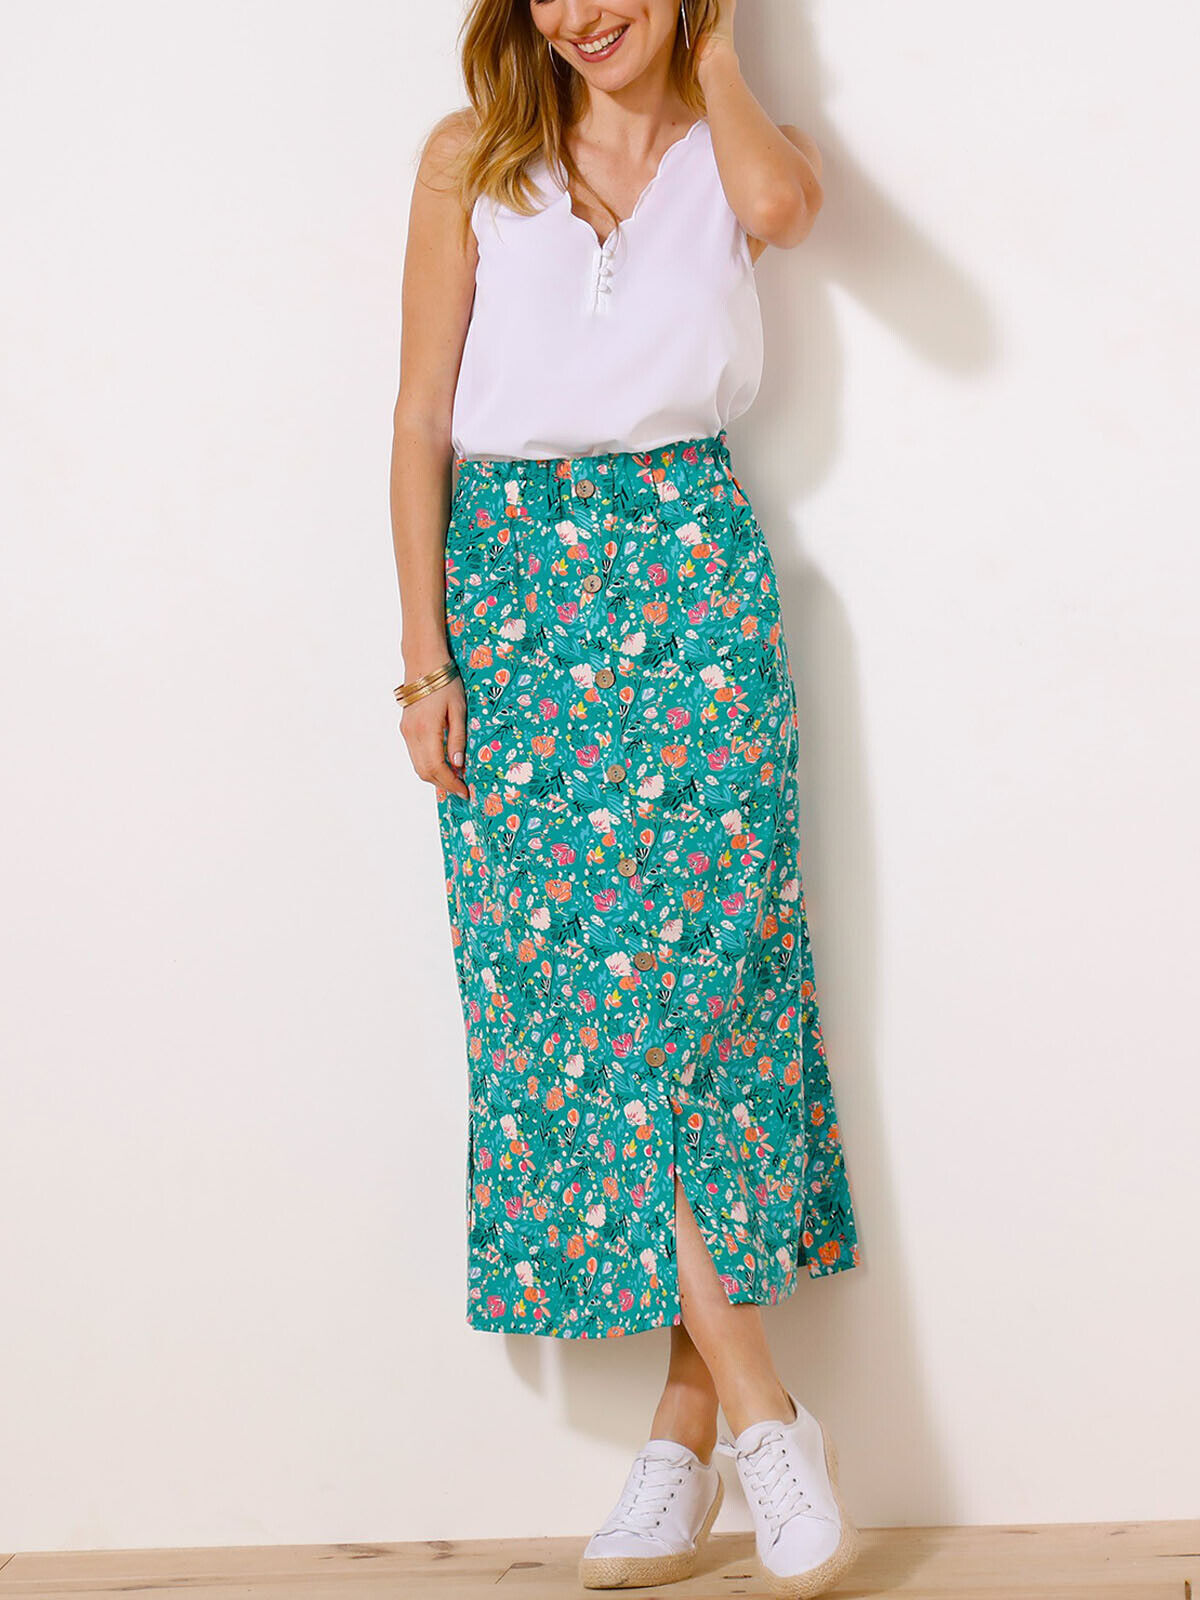 Blancheporte Green Floral Print Button Front Maxi Skirt UK Sizes 20, 22, 24, 26